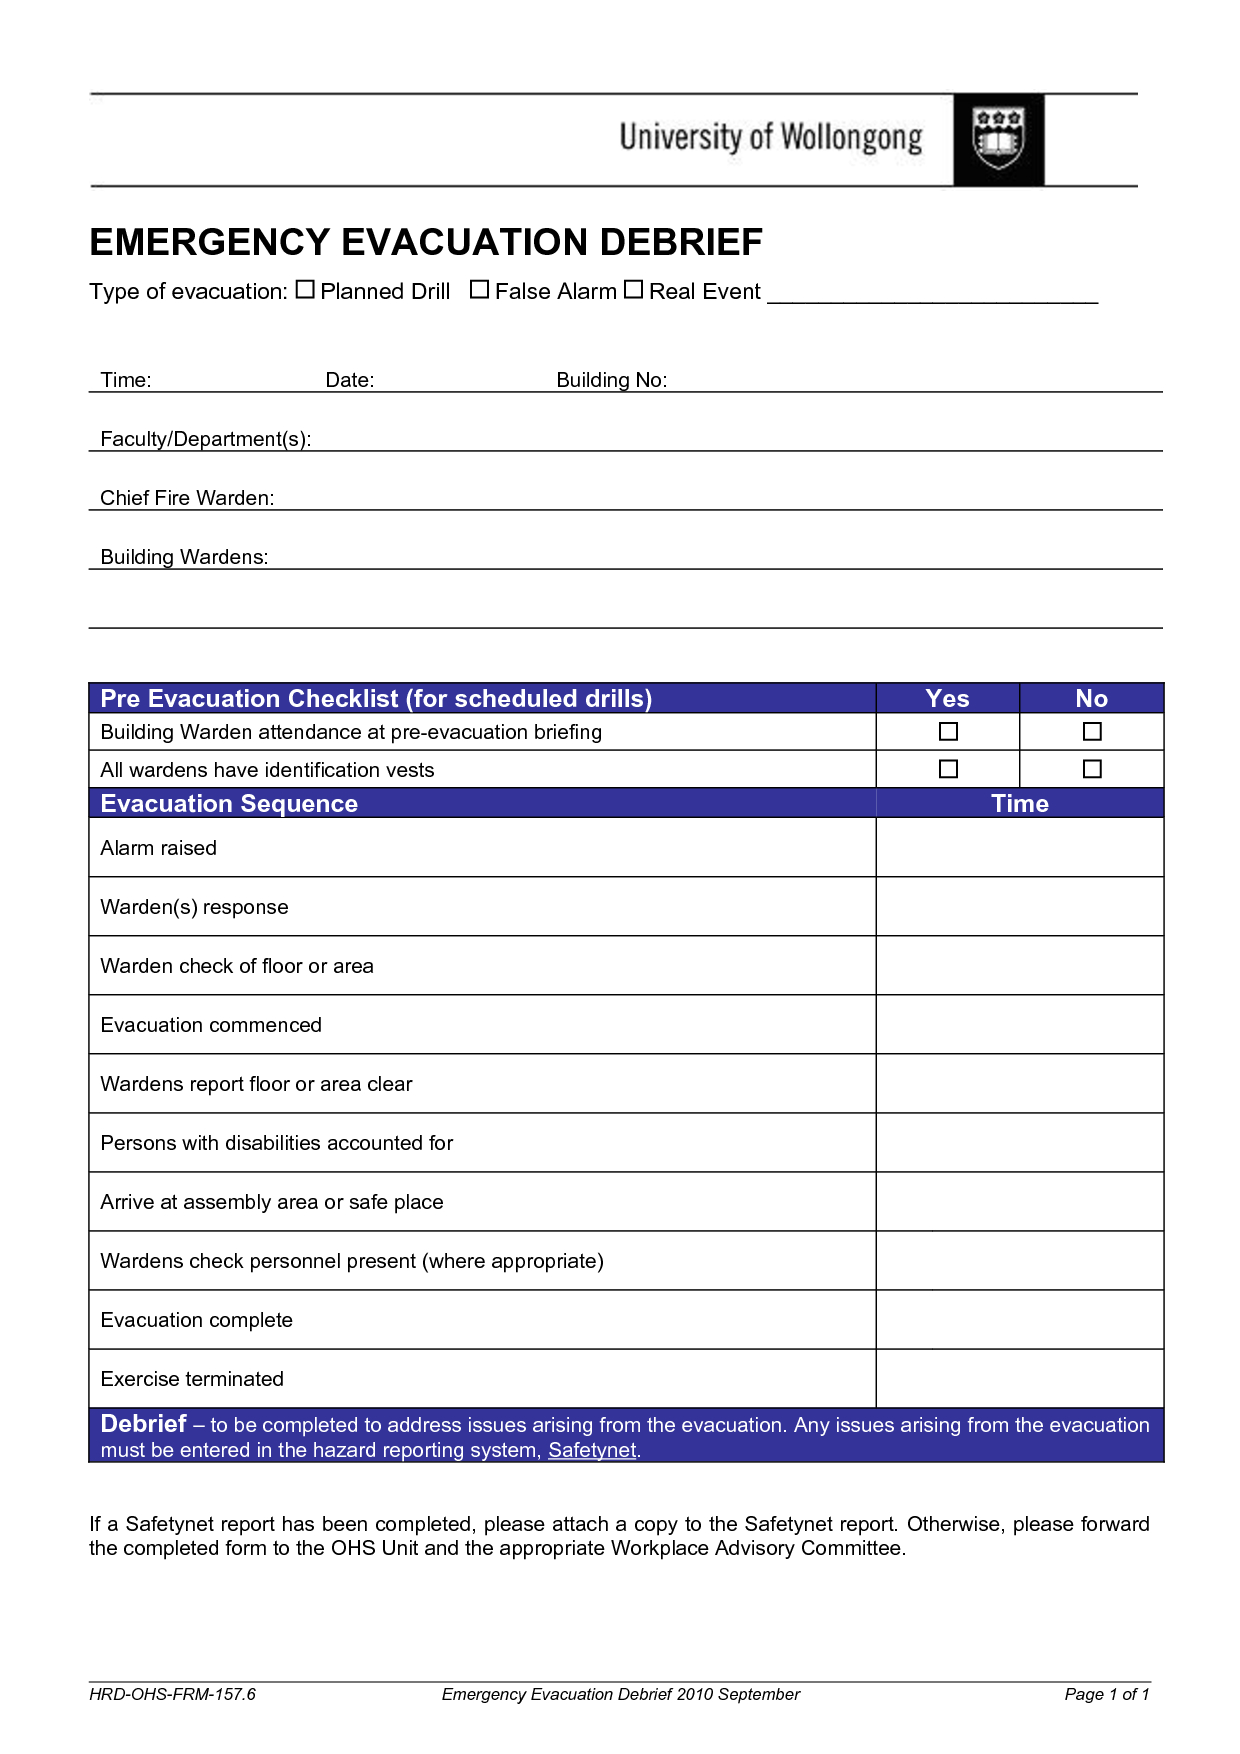 Hospital Debriefing Form Template Intended For Event Debrief Report Template